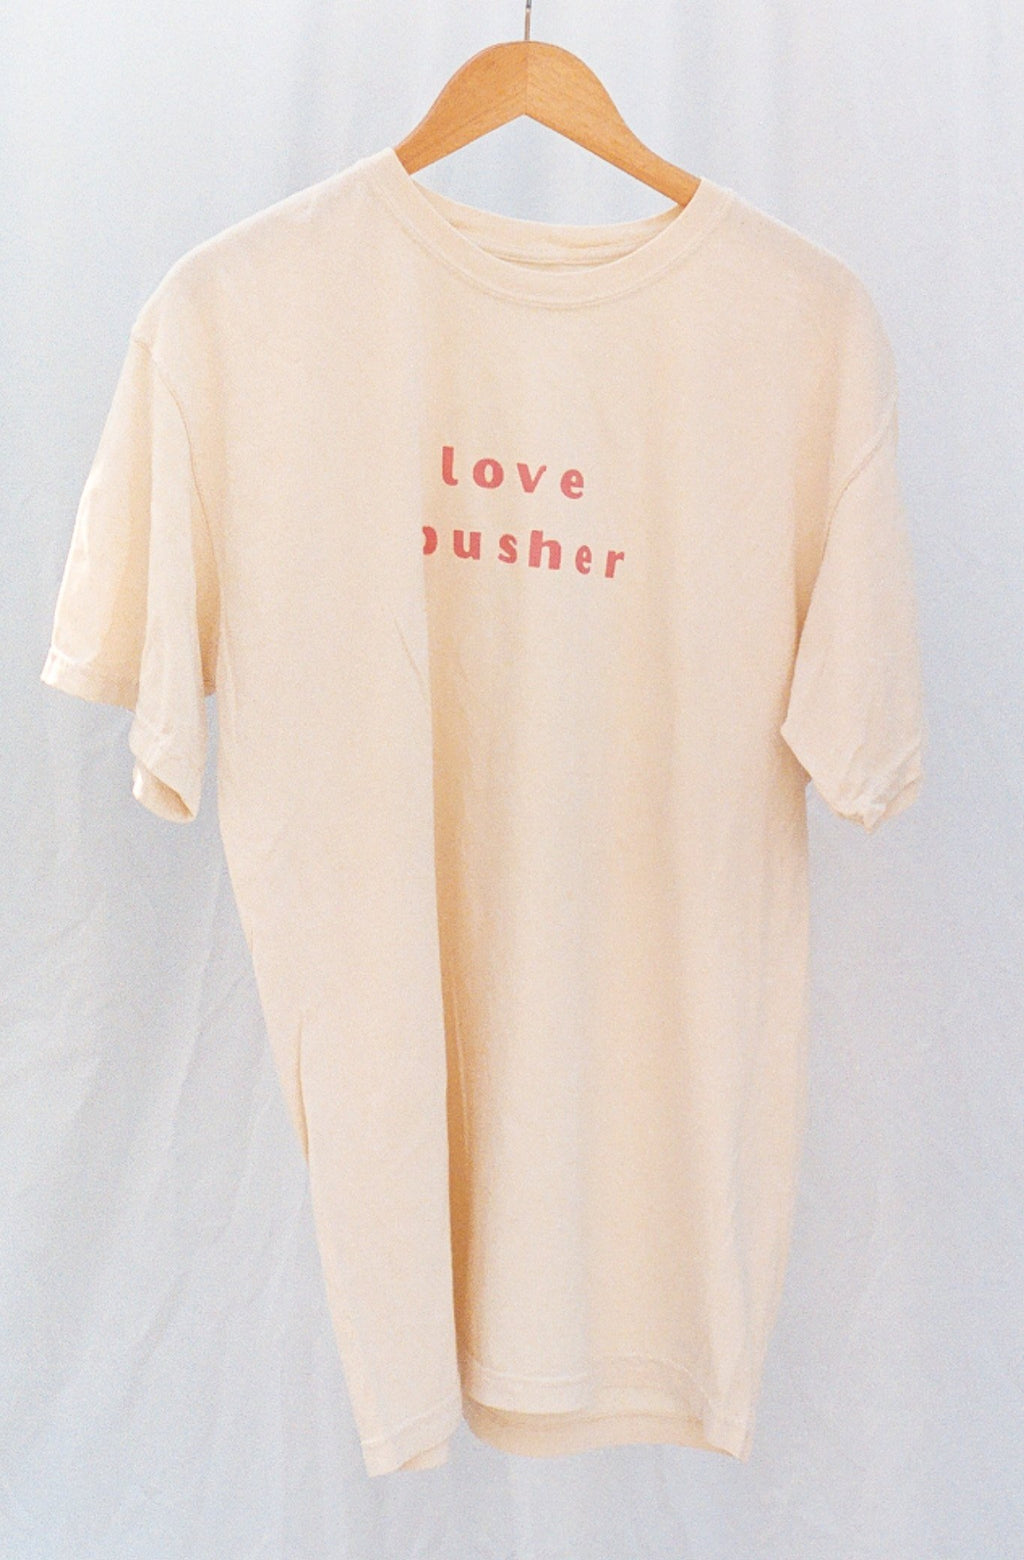 love pusher, love pusher tee, mantra collection, soul proprietor, streetwear, black owned business, women owned business, small business, sustainable fashion, mantras, positive affirmations